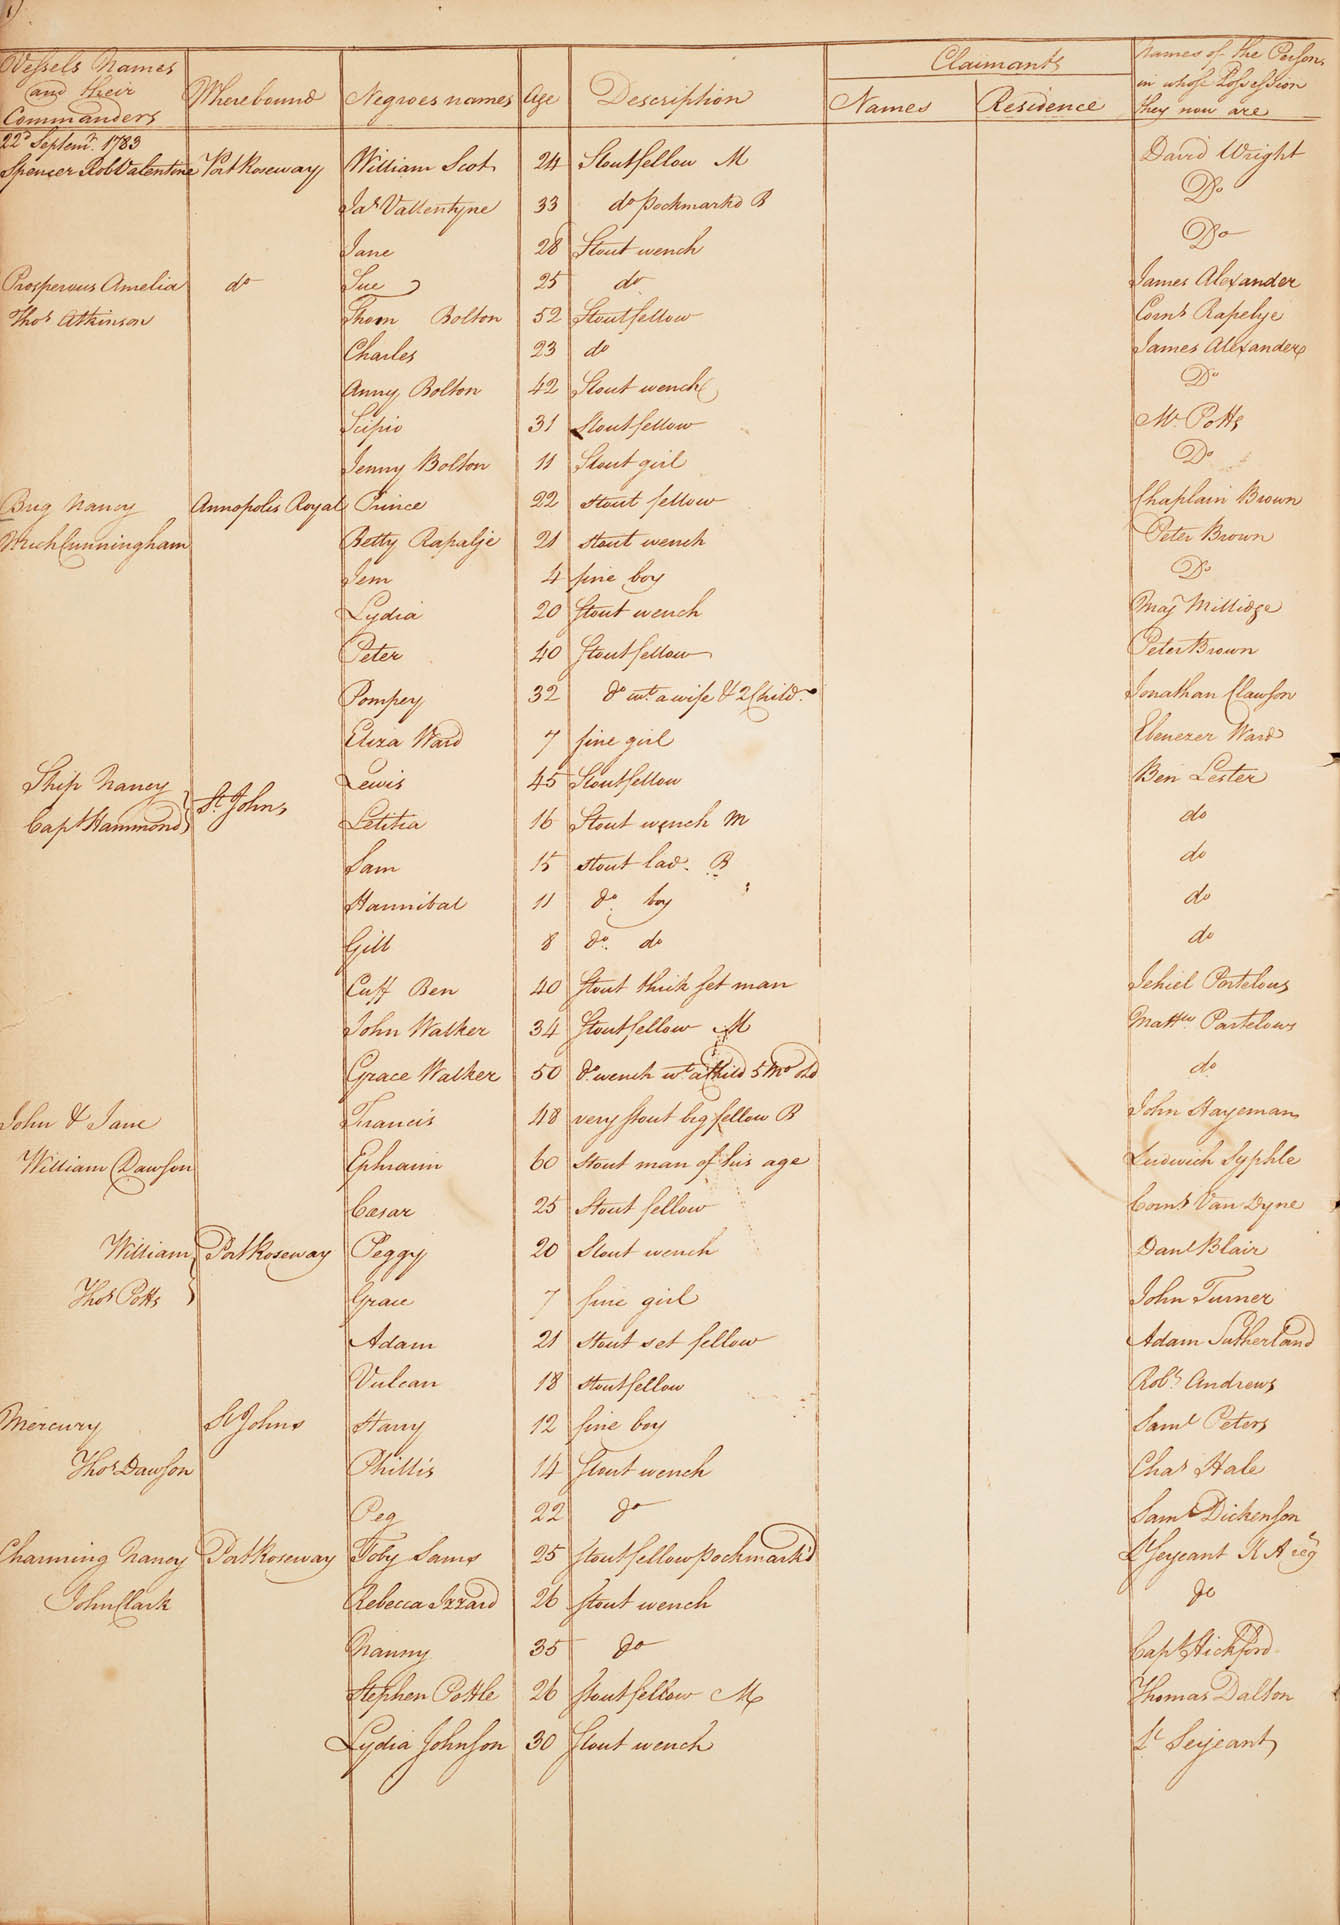 A page from Inspection Roll of Negroes, Book 2